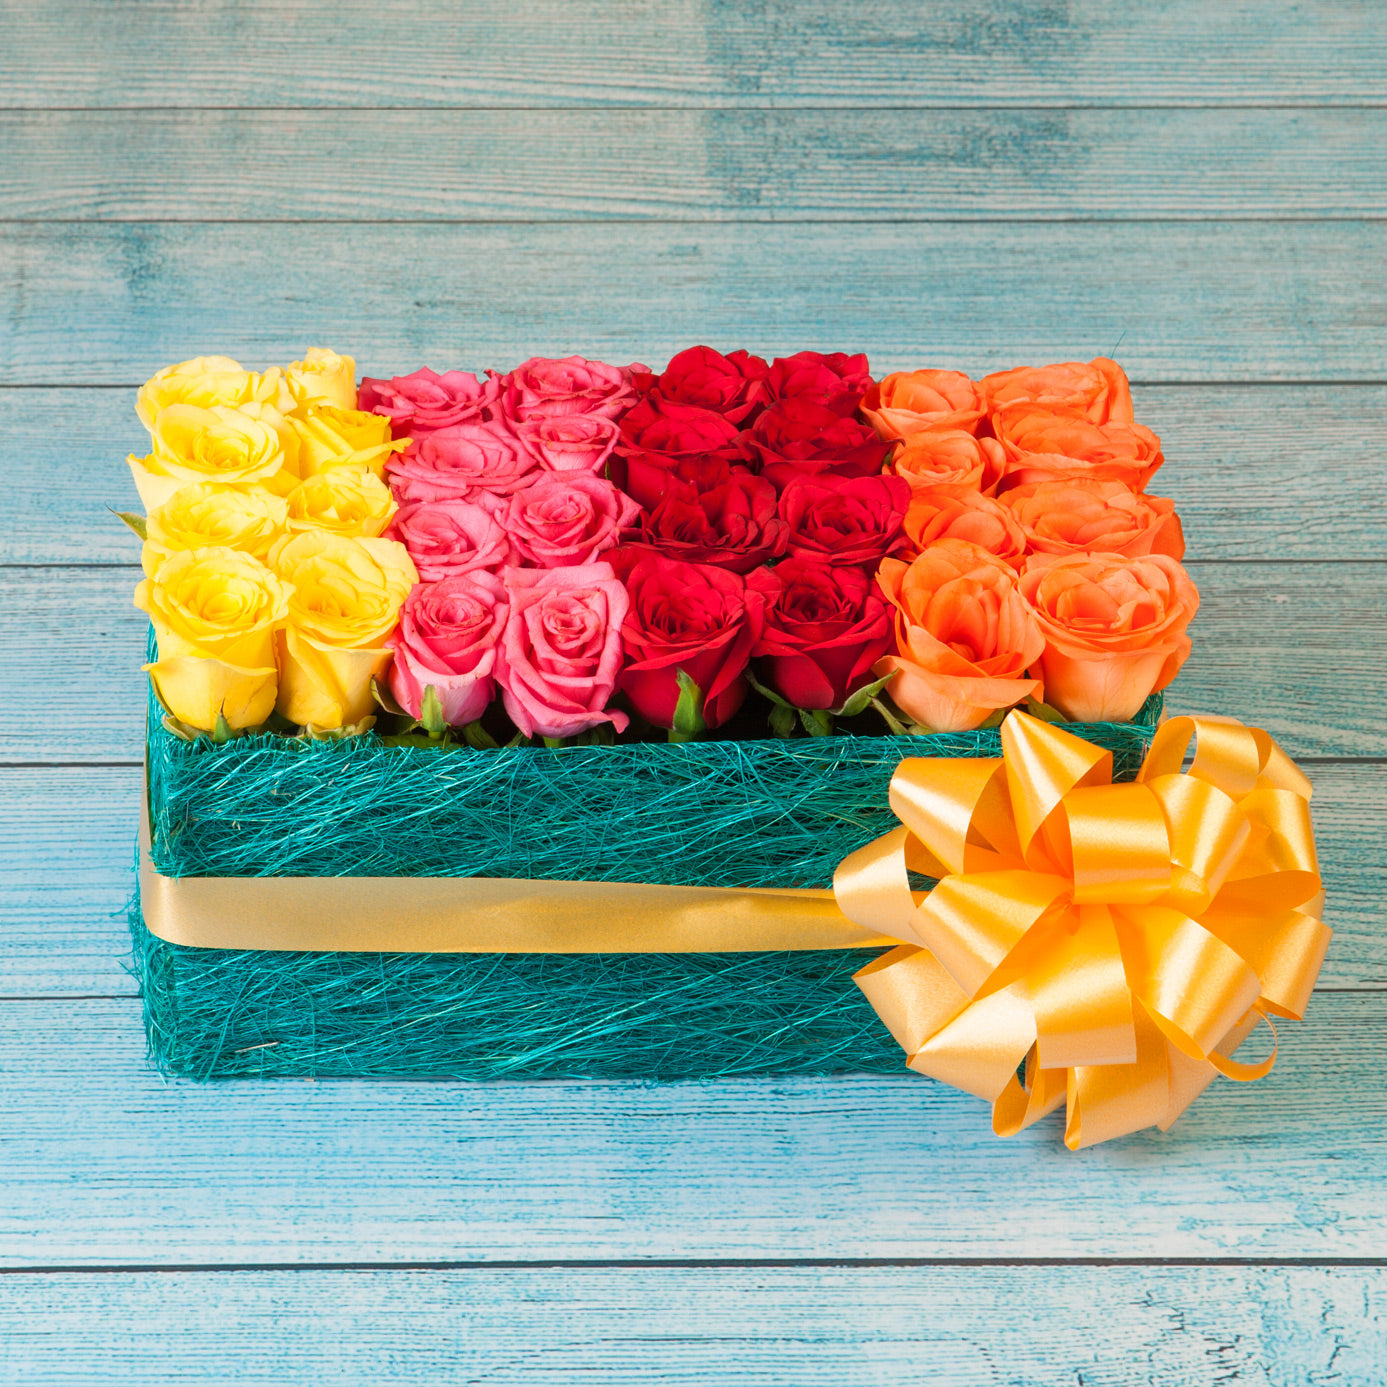 Colorful Roses Arranged in a Bed